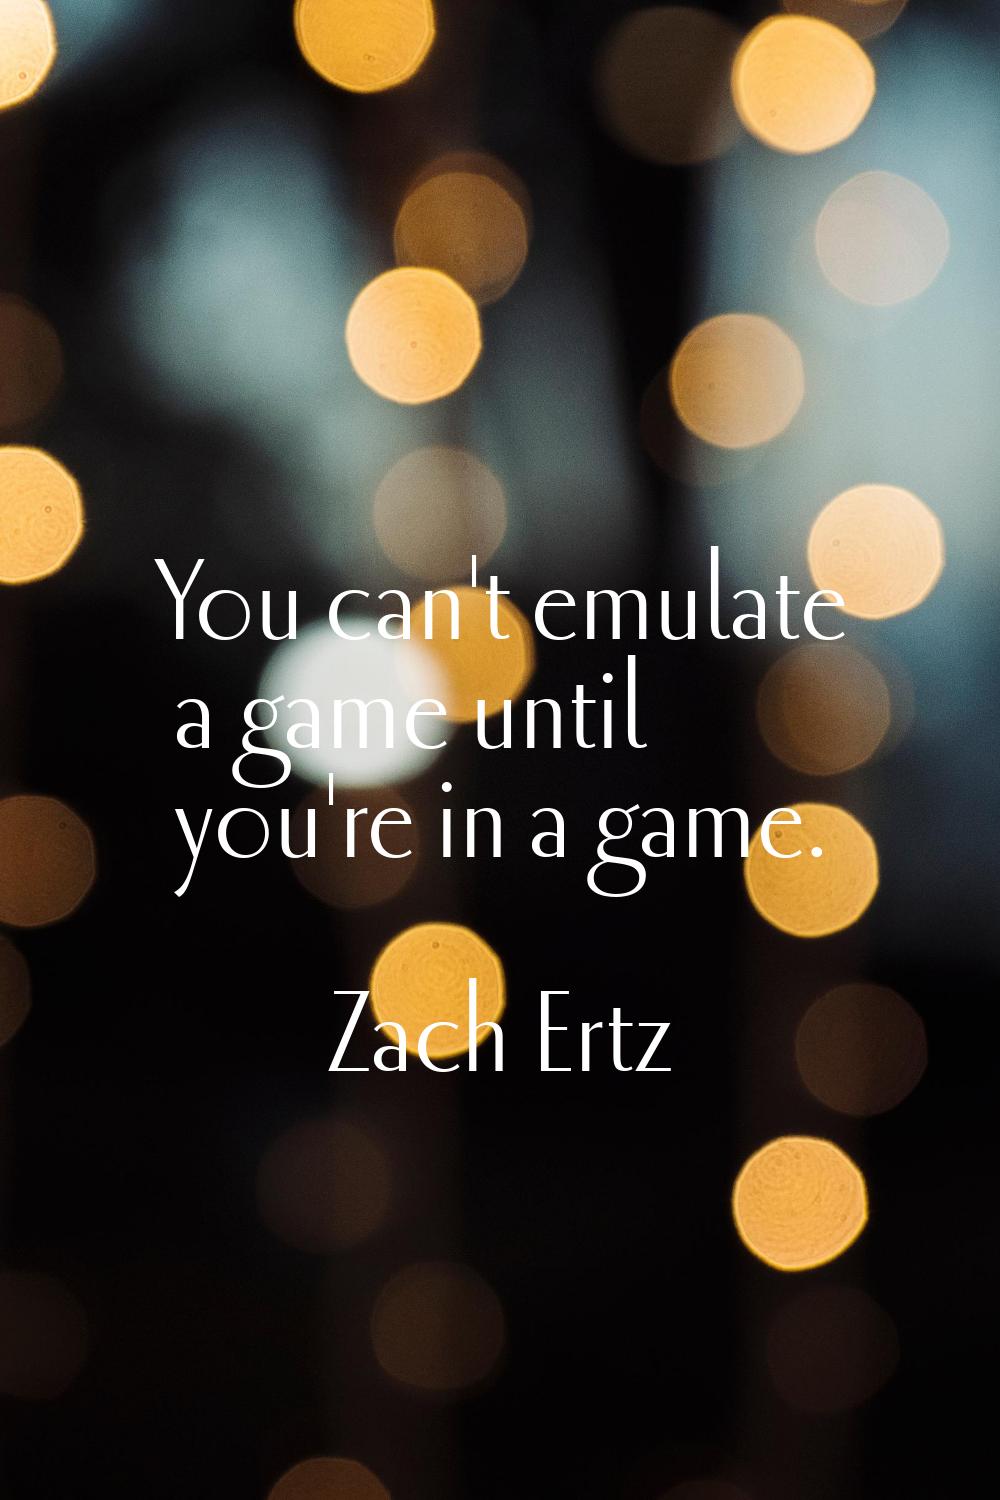 You can't emulate a game until you're in a game.